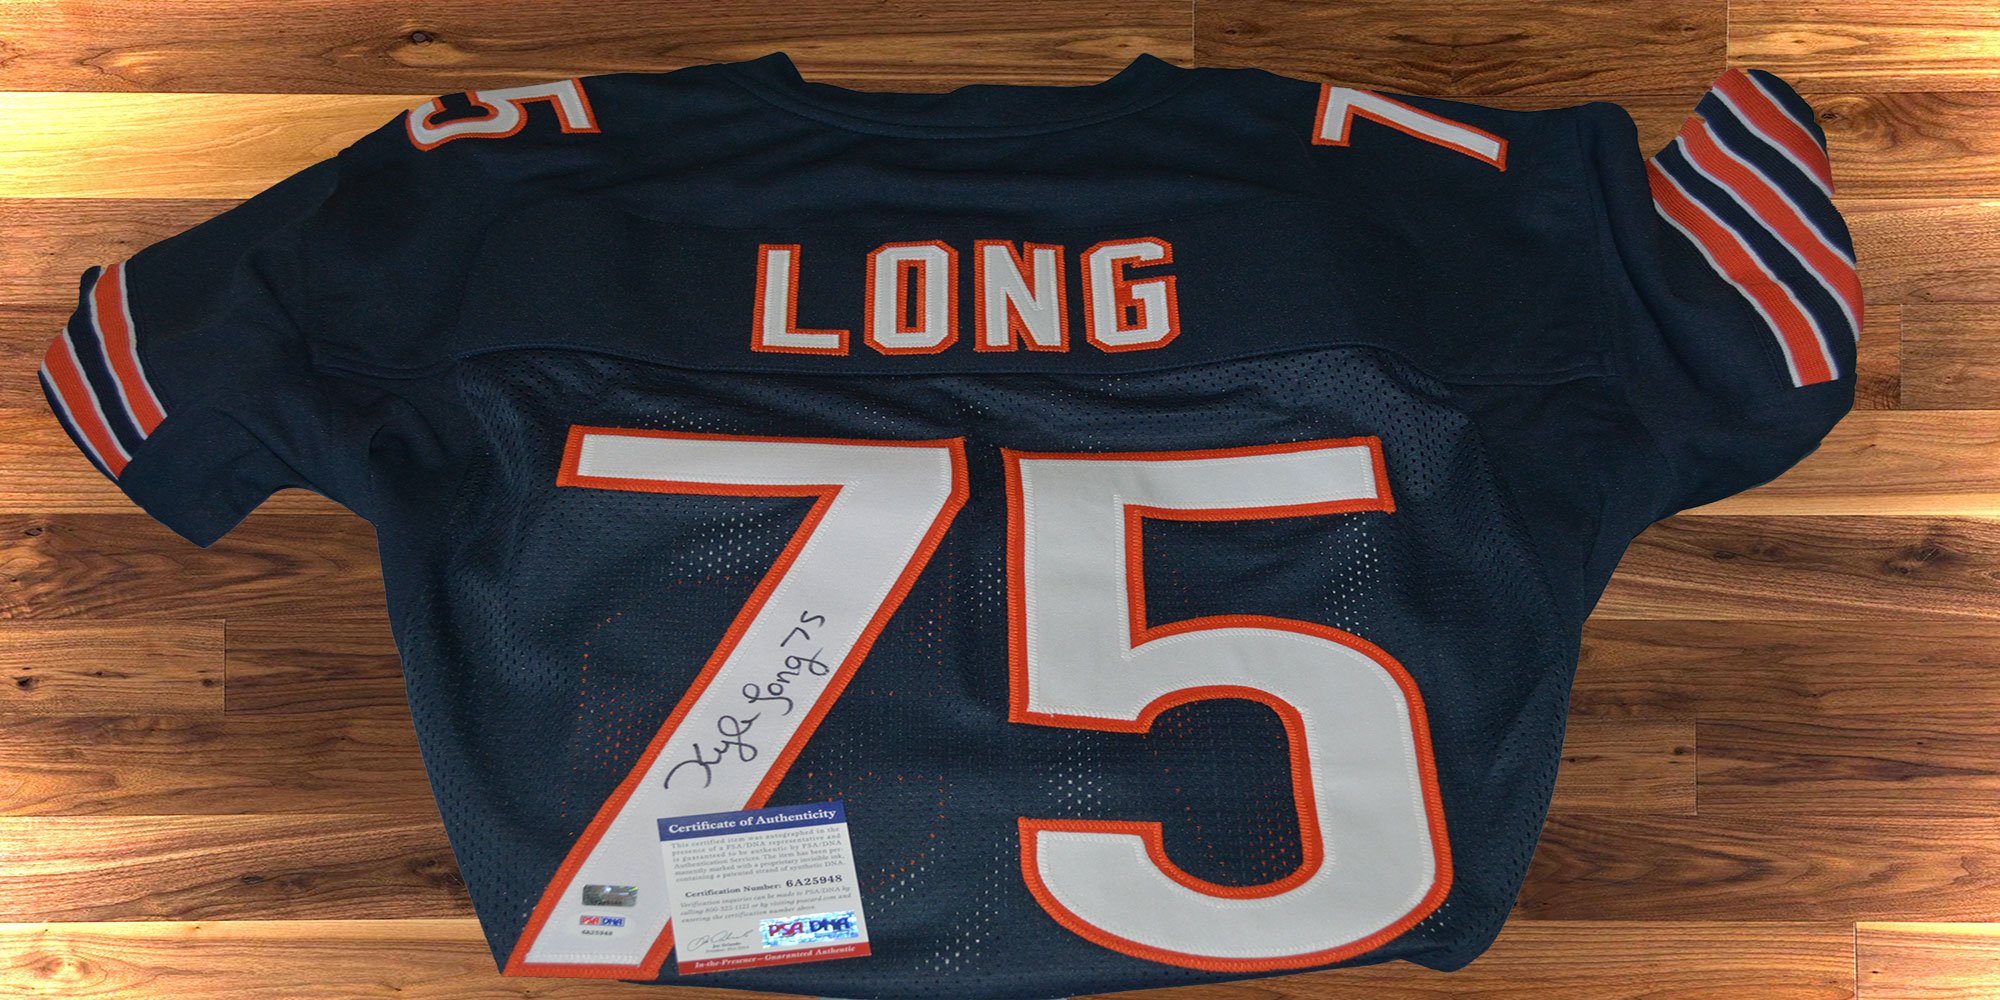 Win A FREE Autographed Kyle Long Jersey